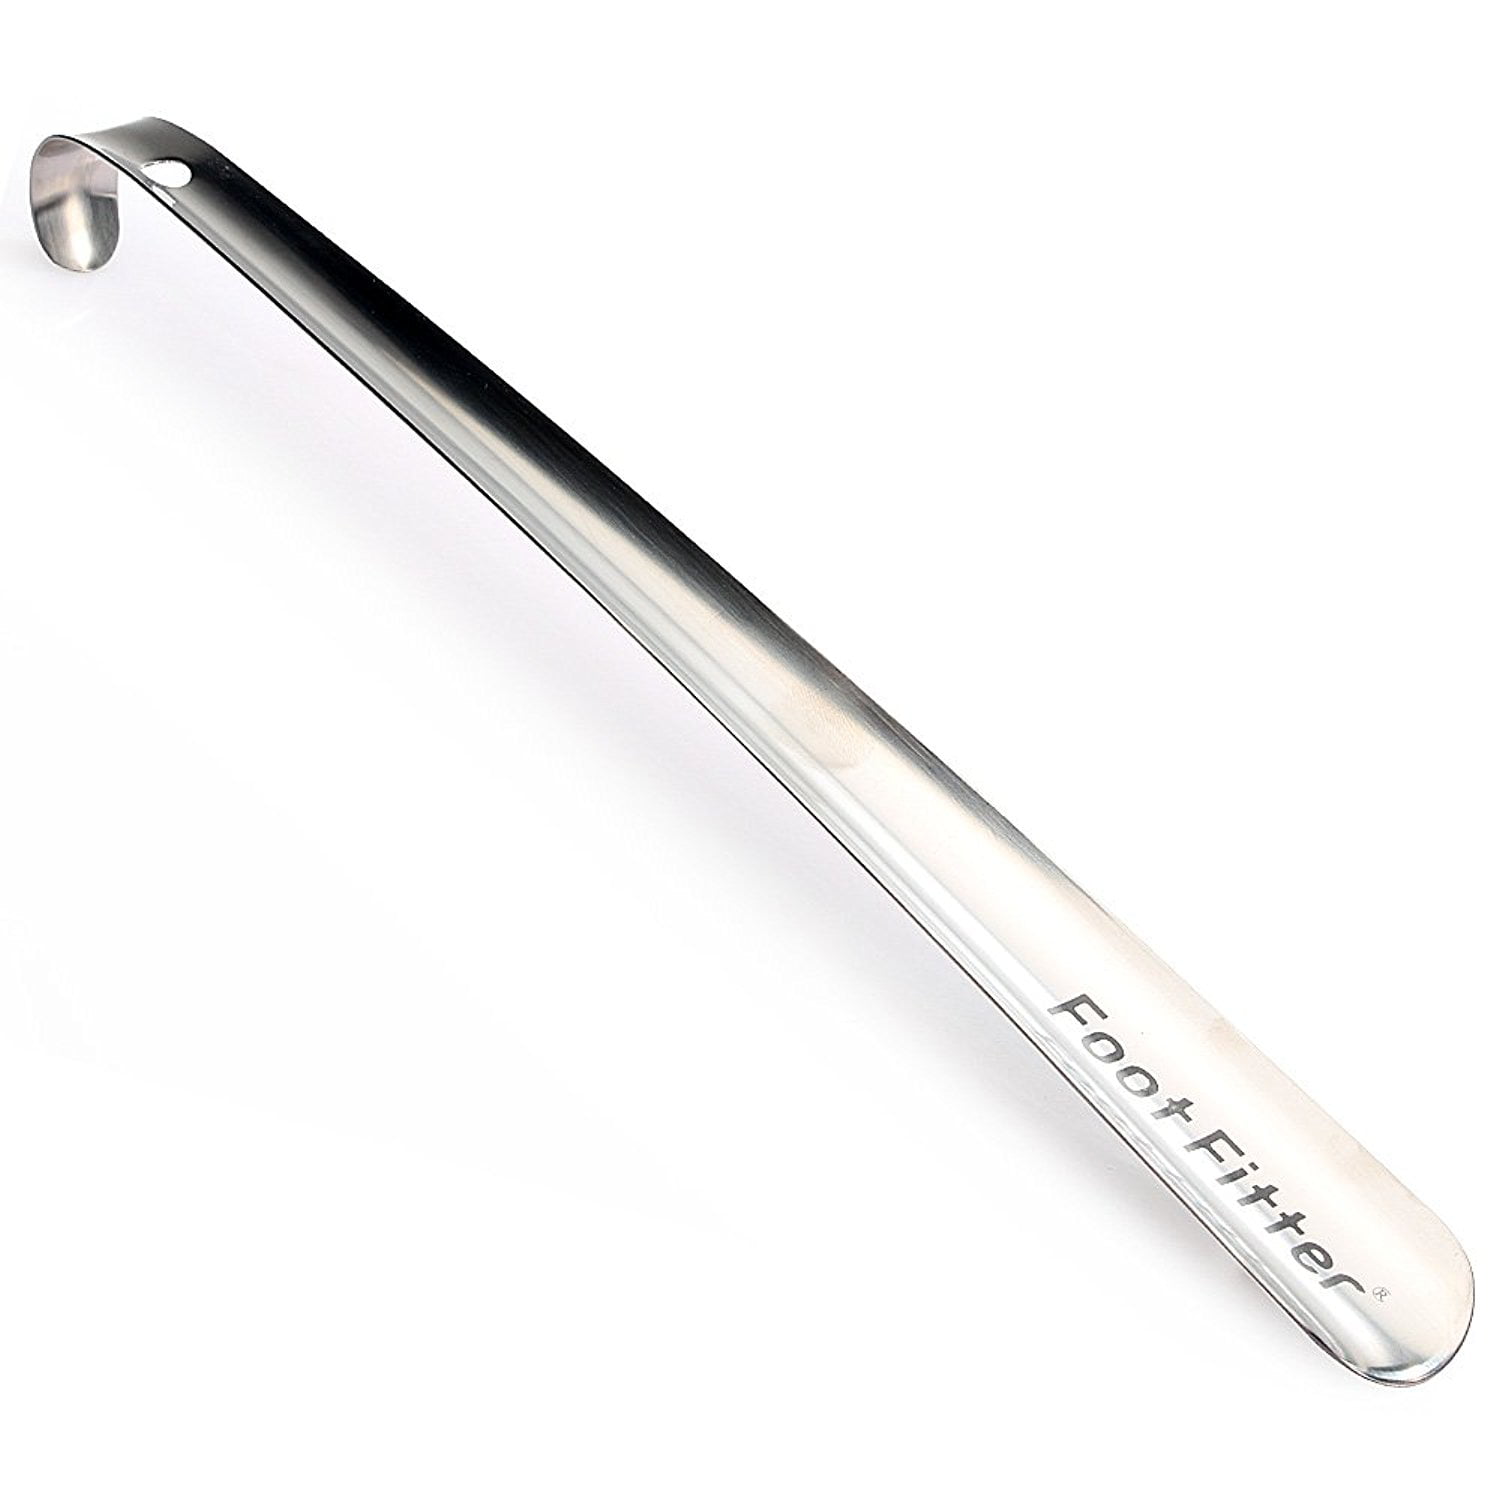 Long Stainless Steel Shoe Horn, 16.8", LENGTH 16.8" By